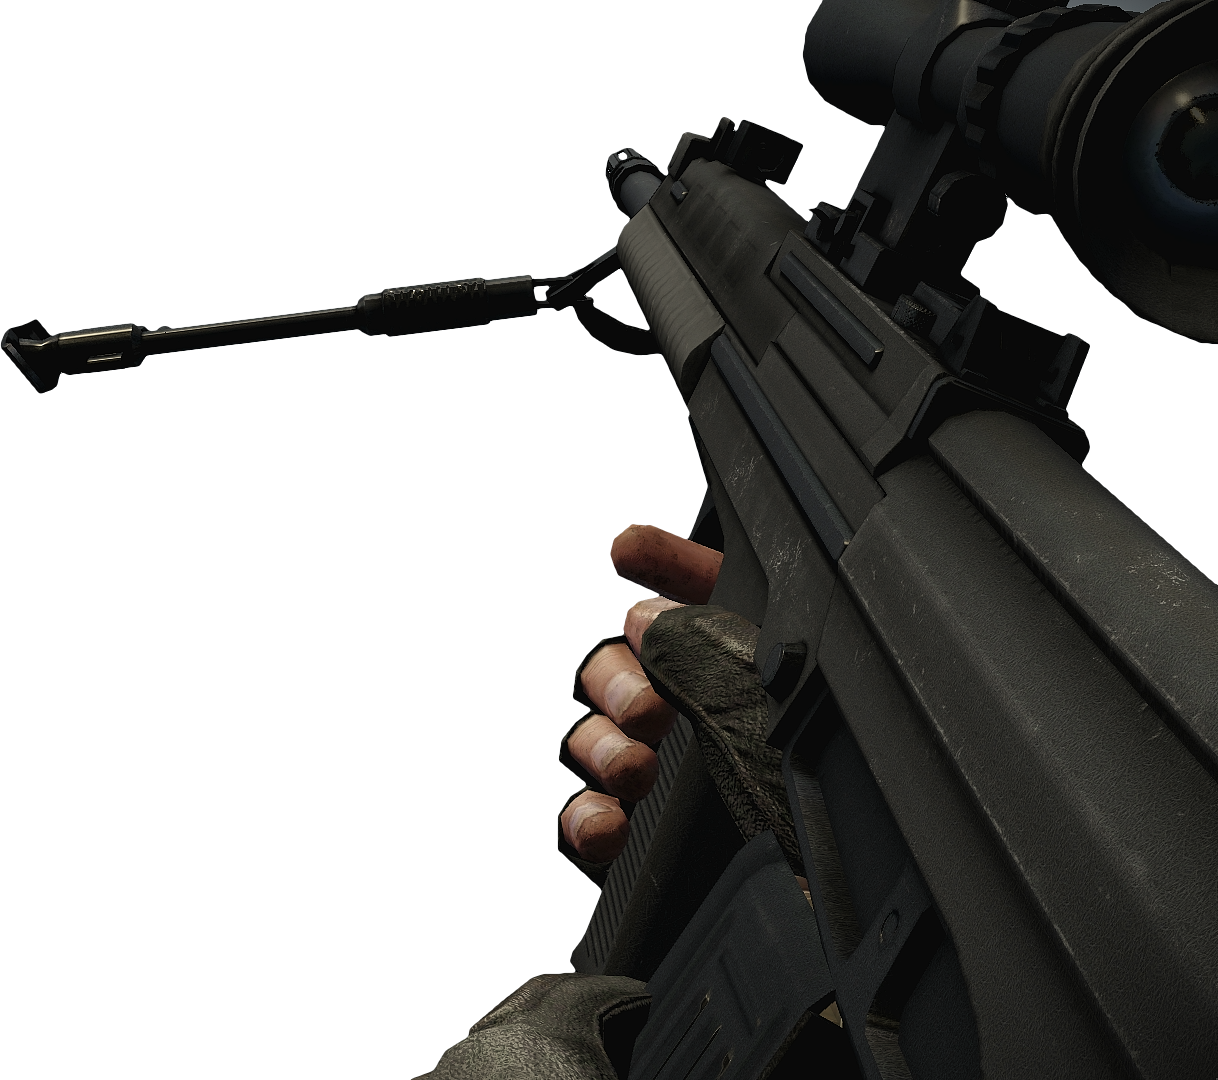 Call of Duty Gun Weapon PNG High-Quality Image